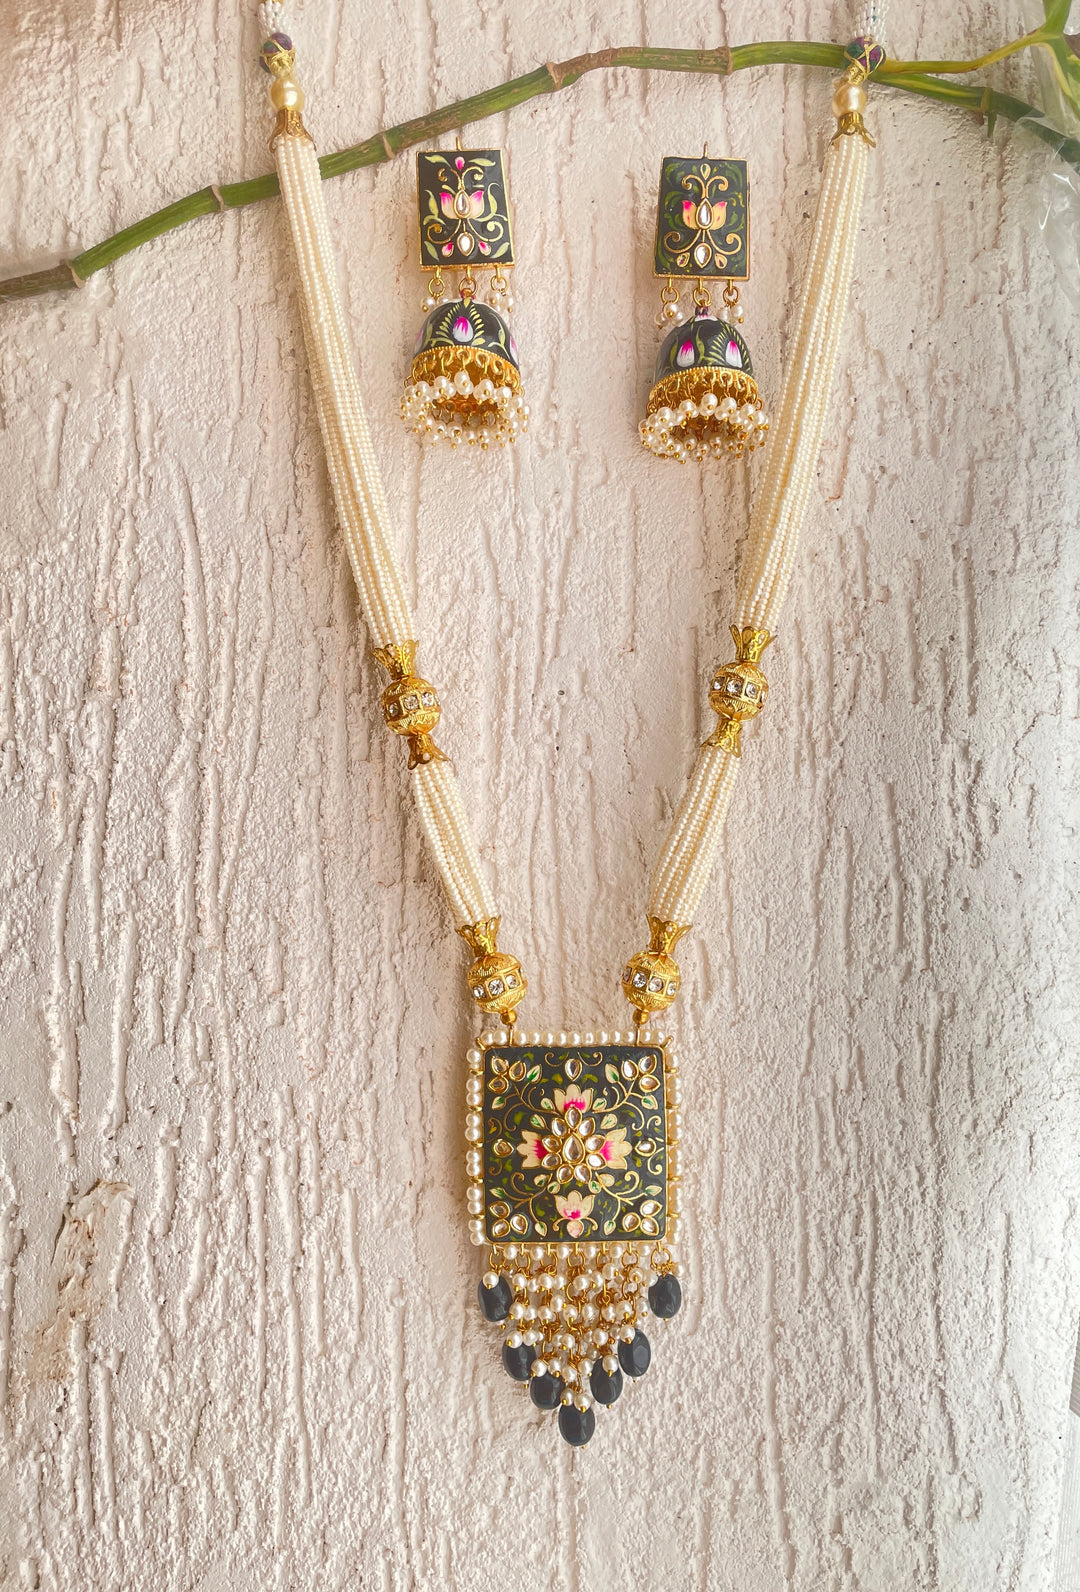 BLACK LOTUS HAND PAINTED  NECKLACE & EARRING SET